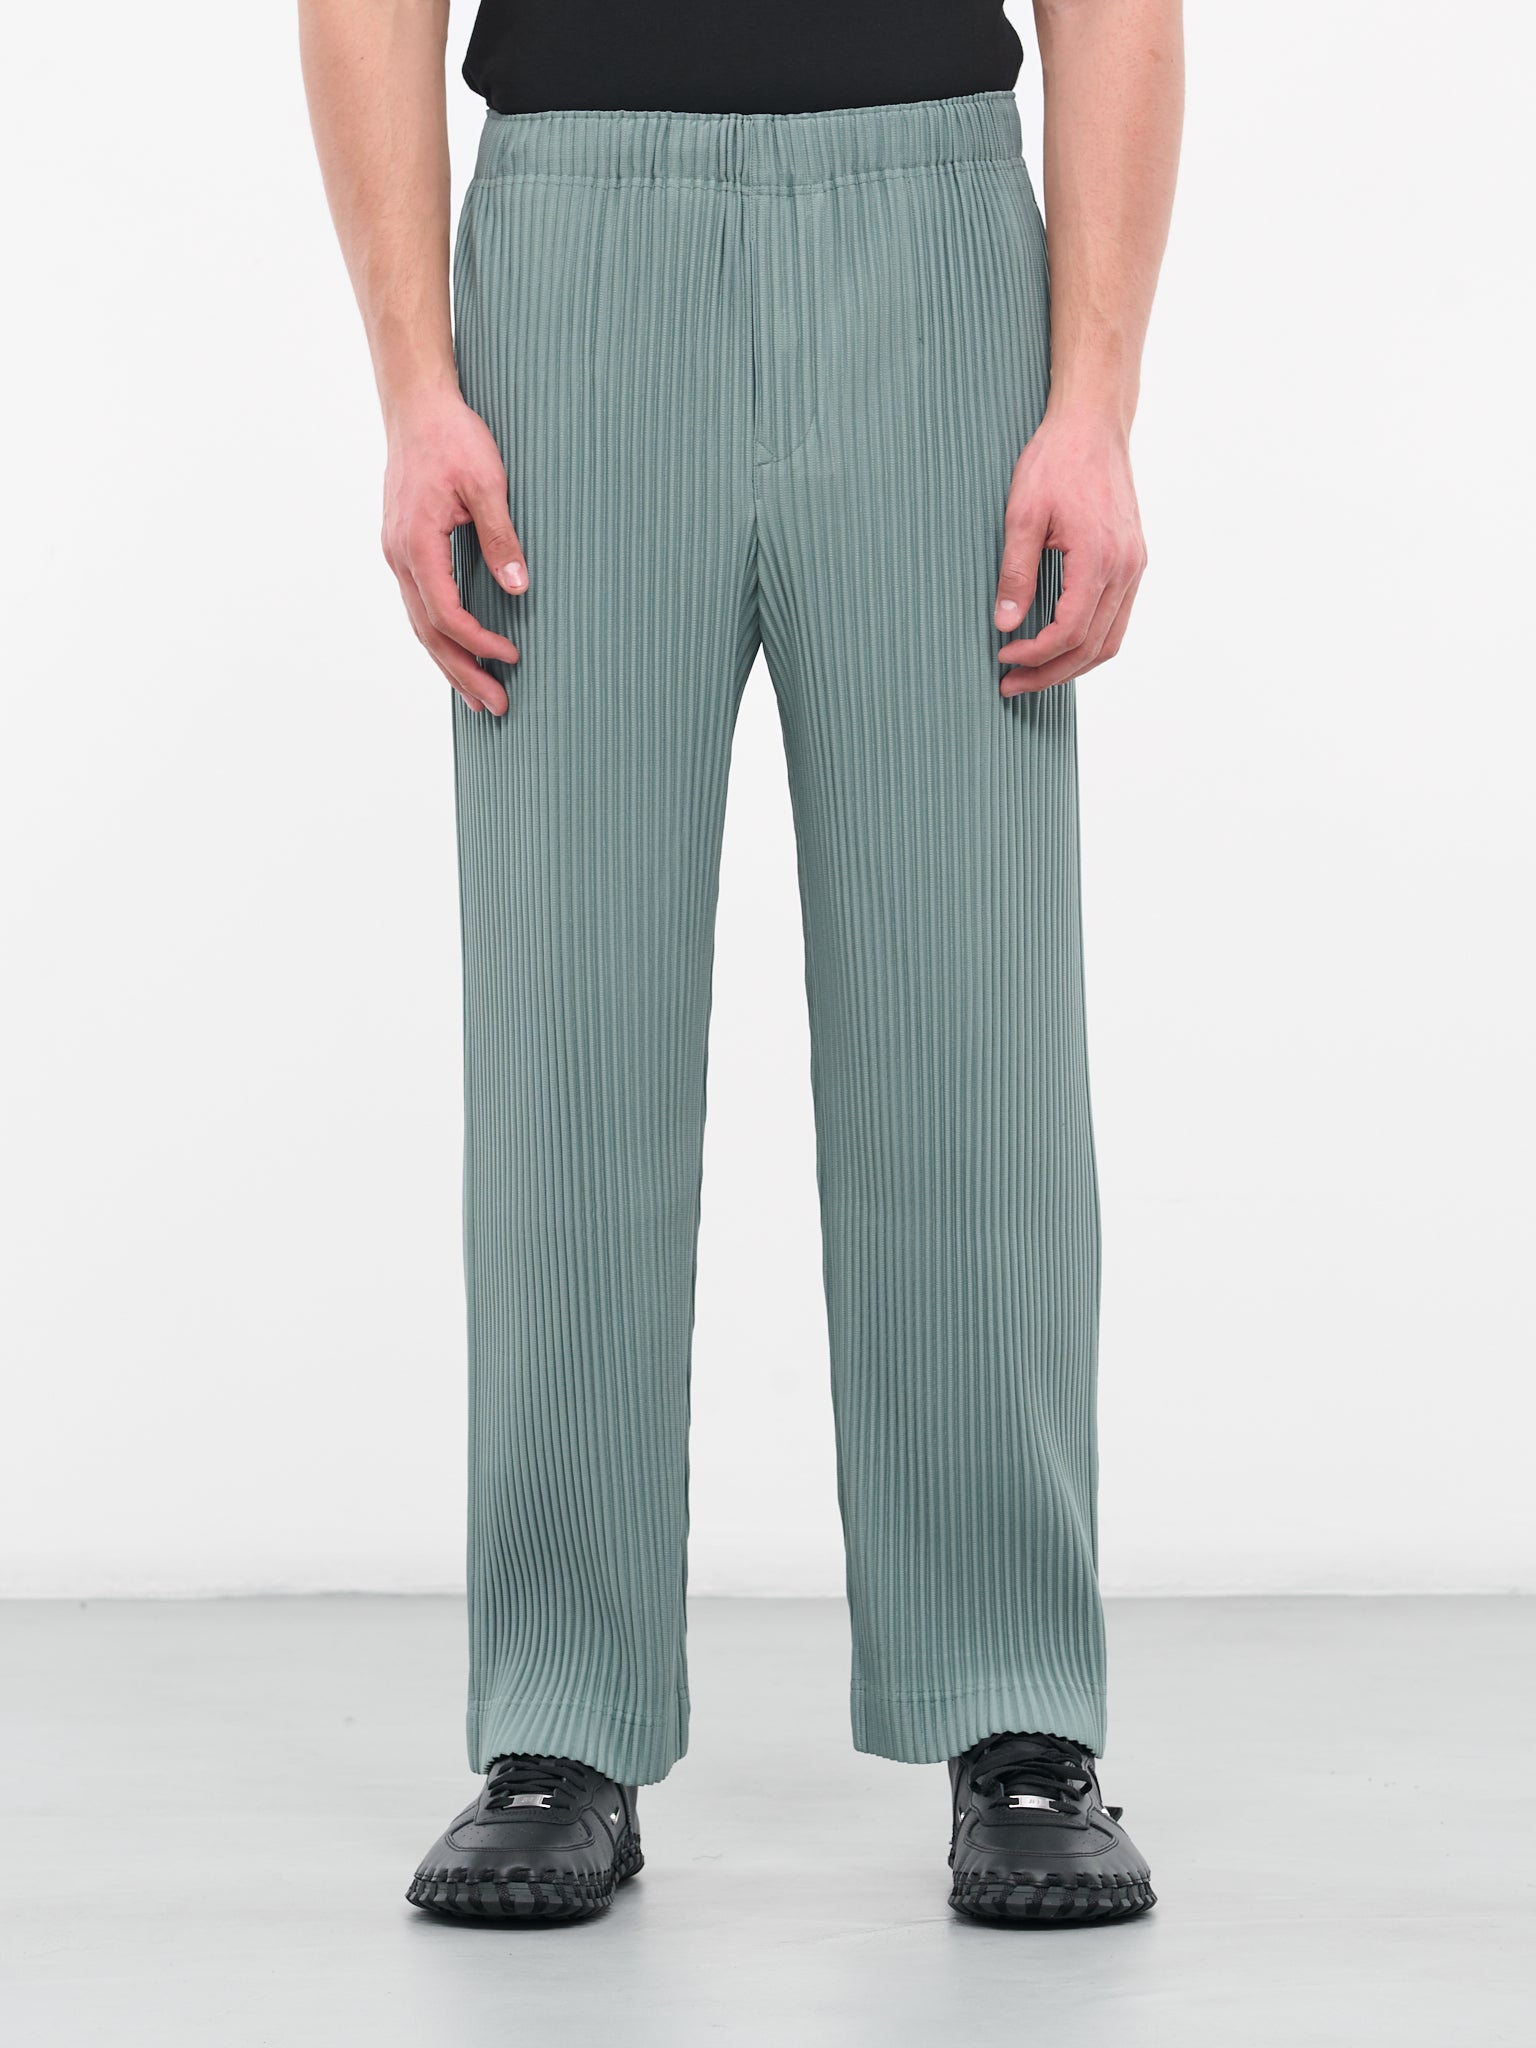 August Trousers (HP38JF109-16-MINT-GRAY)